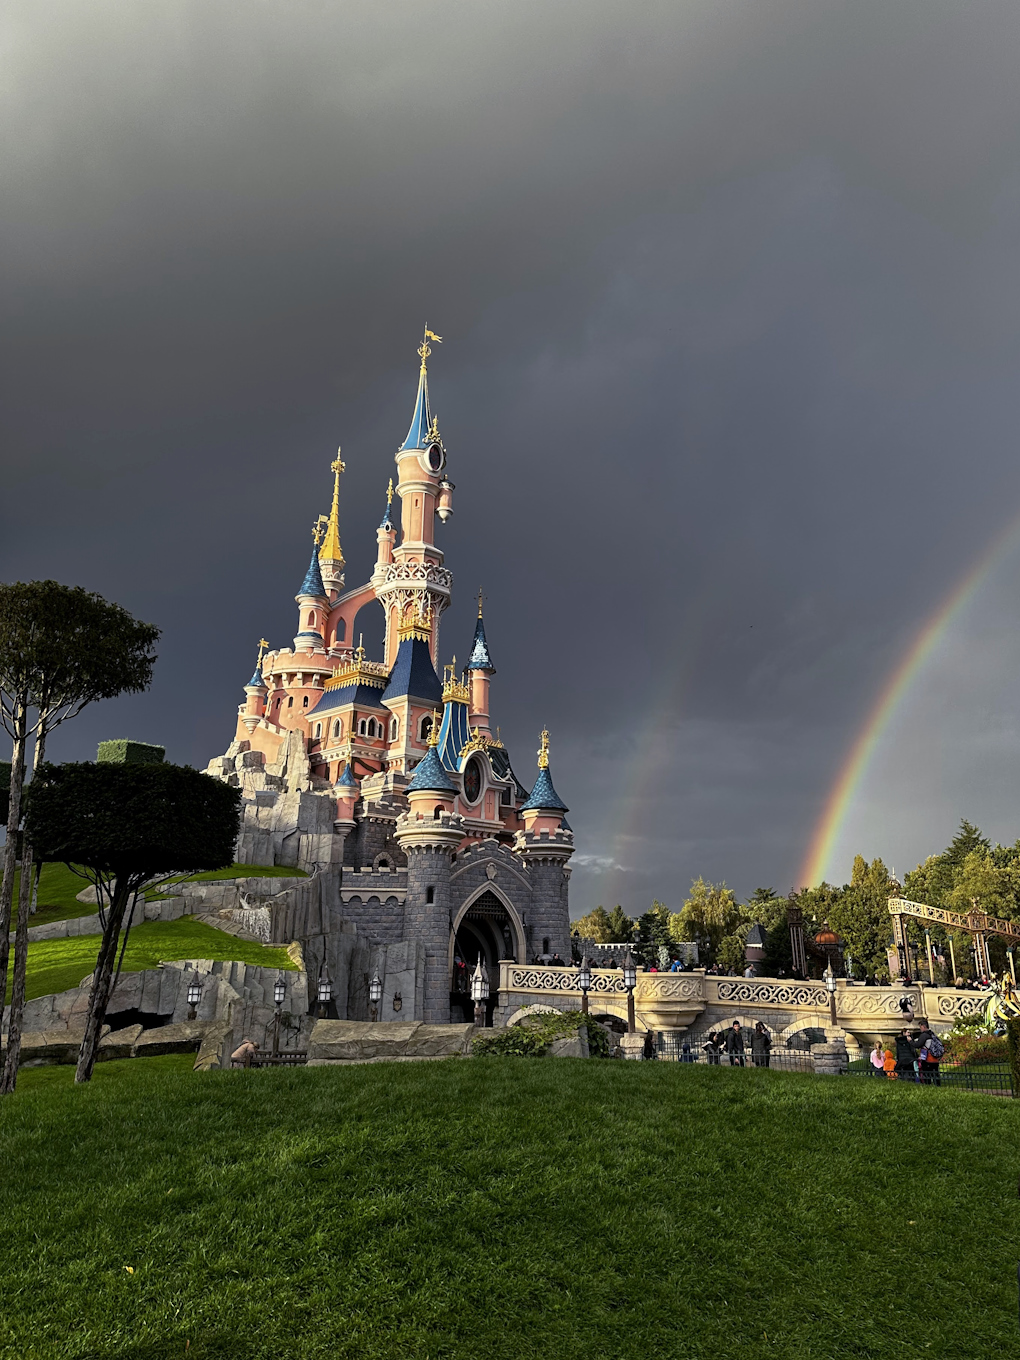 A double rainbow appears next to Sleeping Beauty's castle in Disneyland Paris, set against dark clouds with bright green grass in the foreground